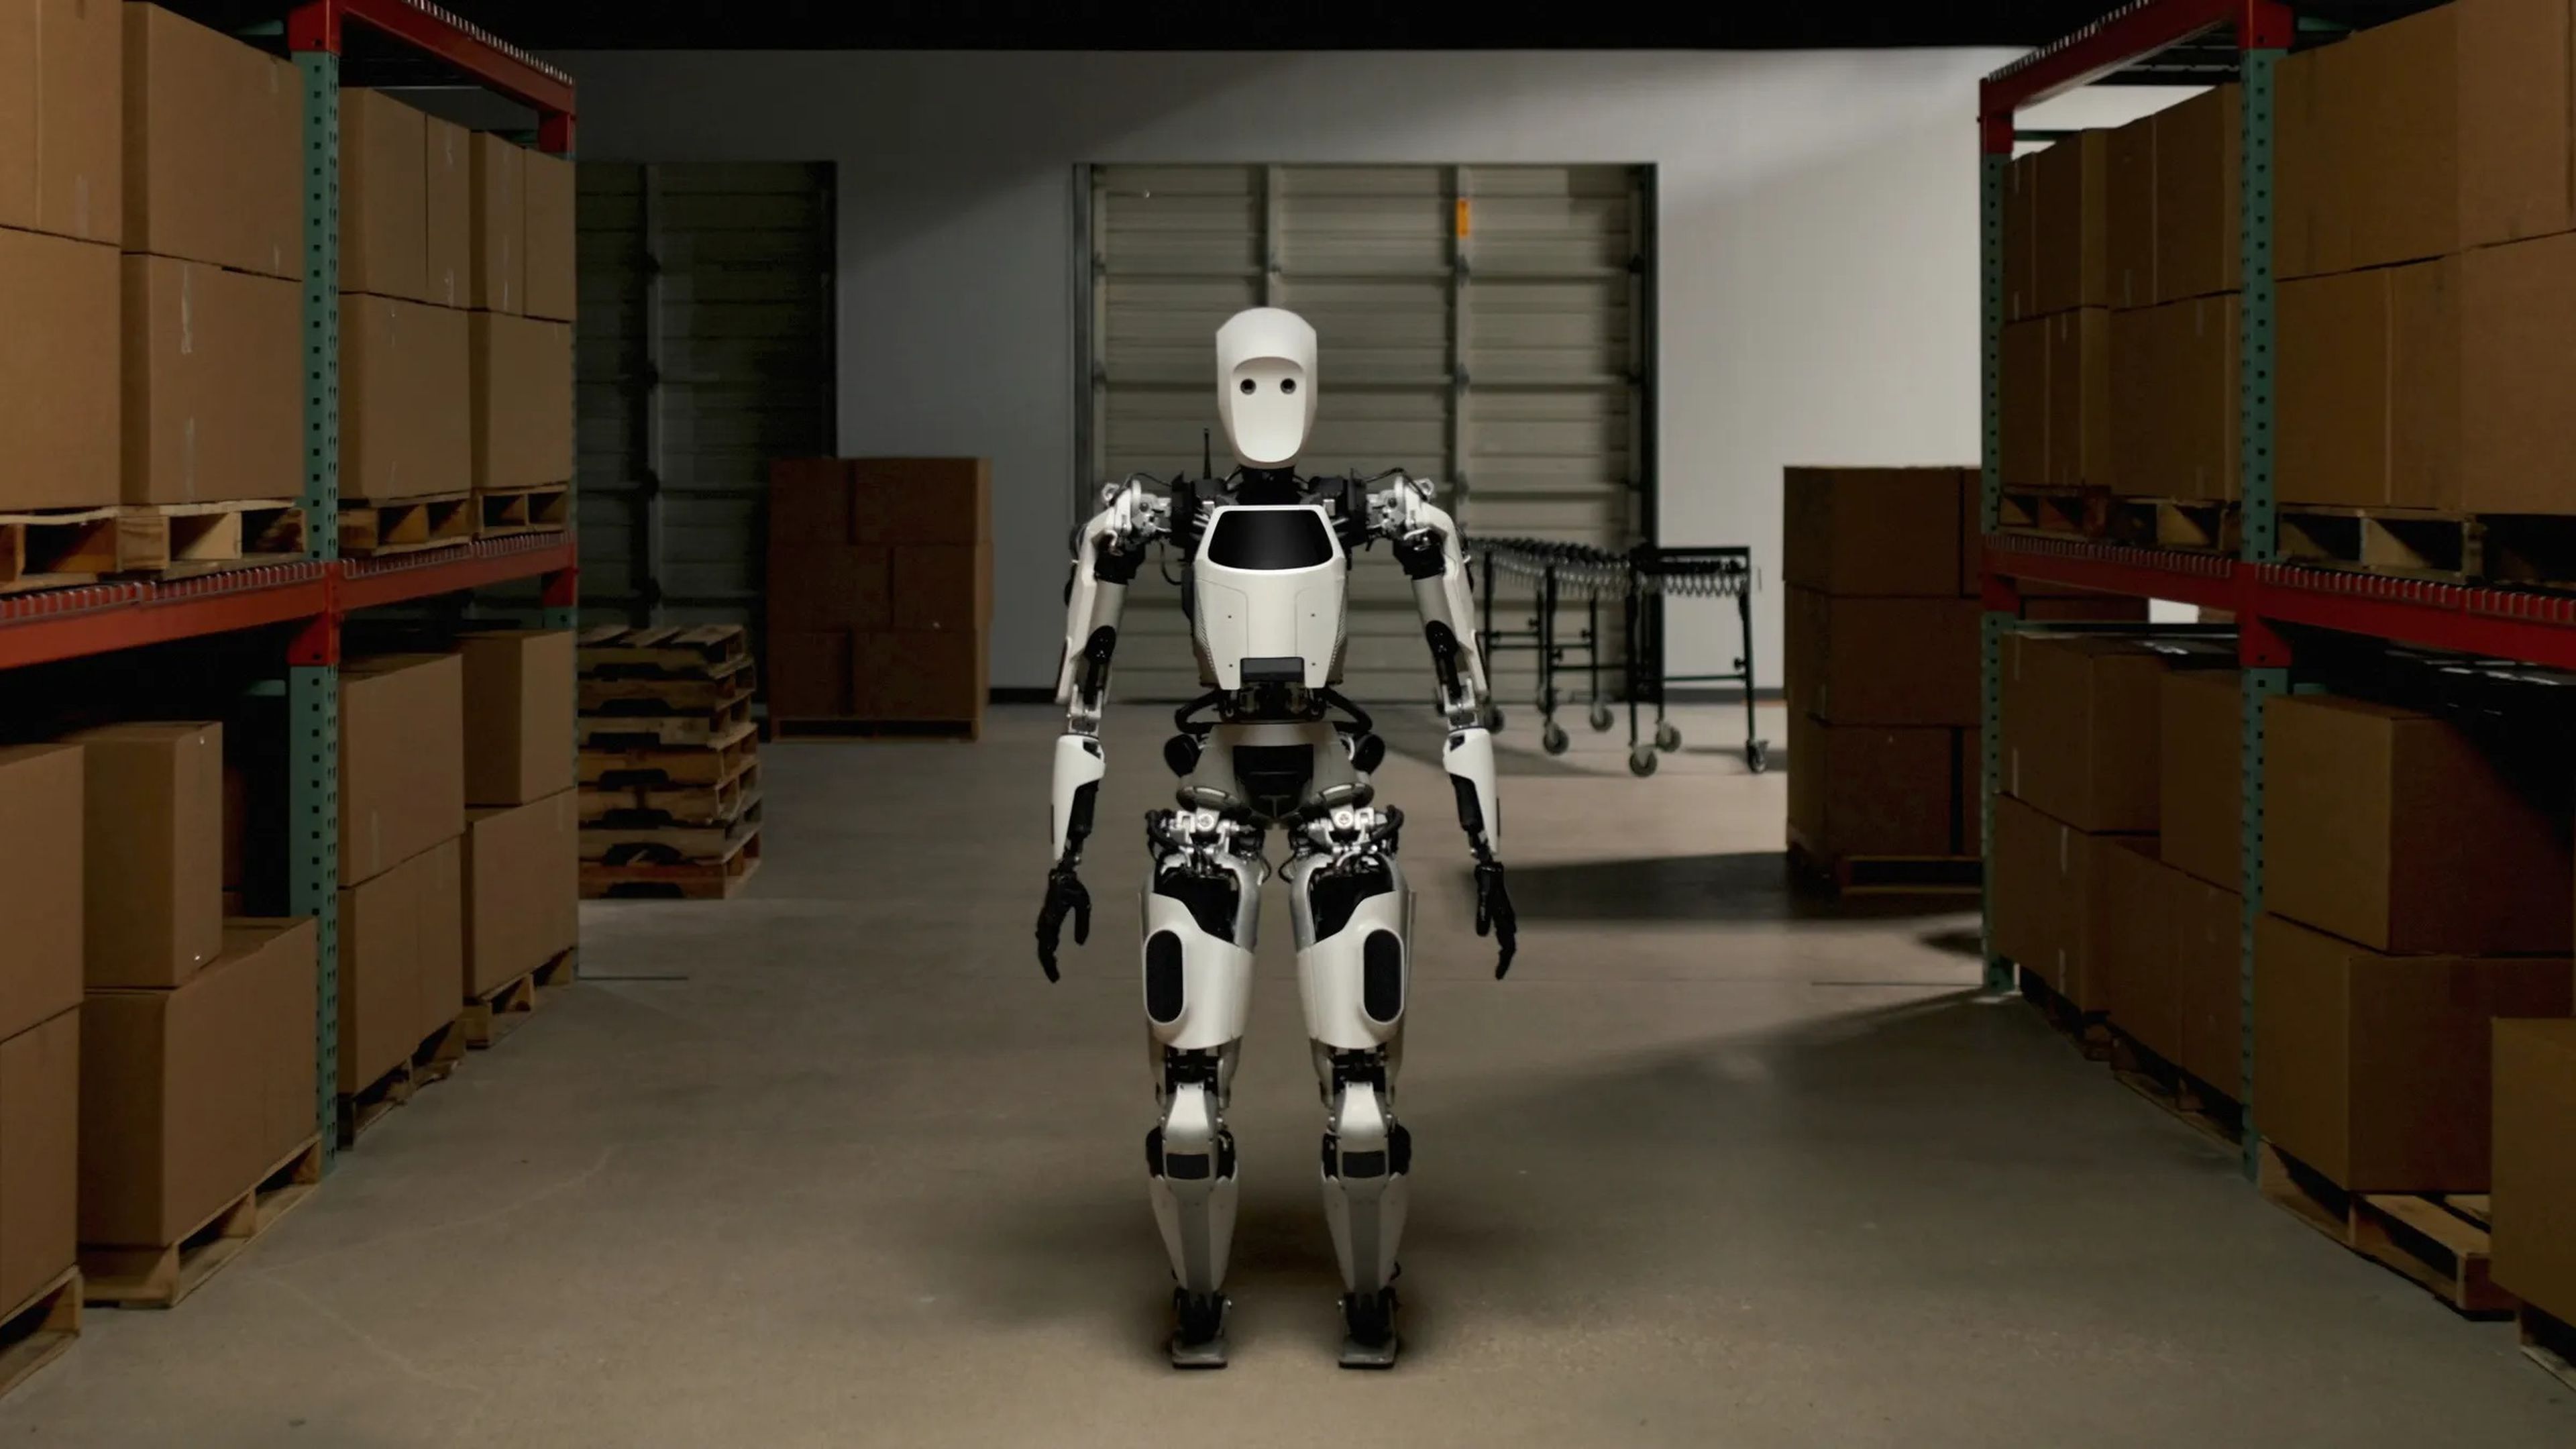 Apptronik's robot called Digit standing in a warehouse